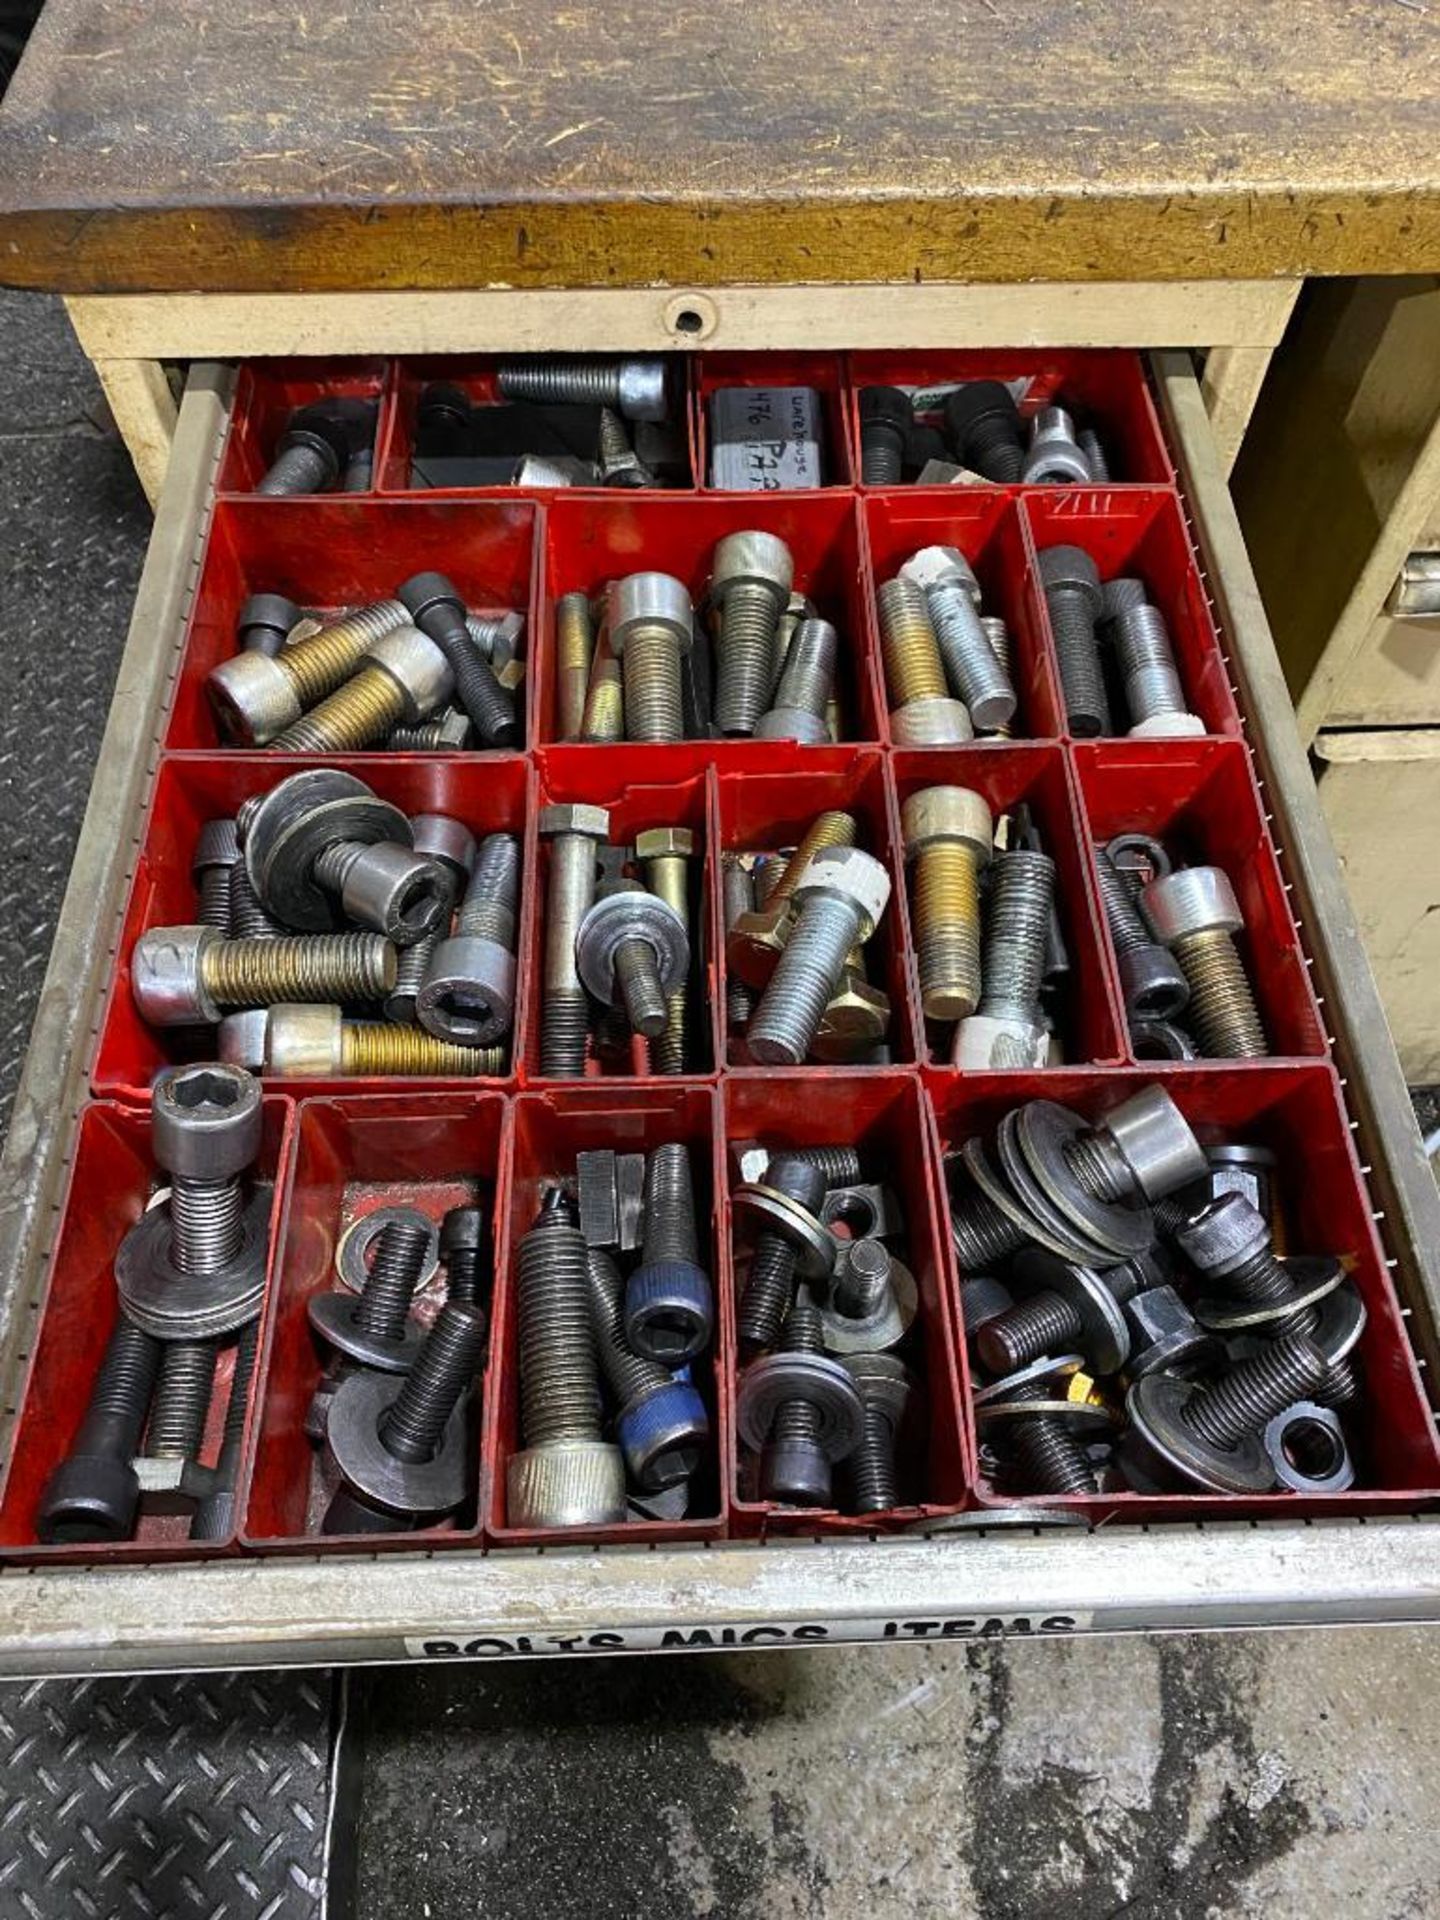 (3) VIDMAR CABINETS W/WOODEN TABLE TOP, HOSE REEL, AND CONTENTS OF ASSORTED PRECISION TOOLS, HAND TO